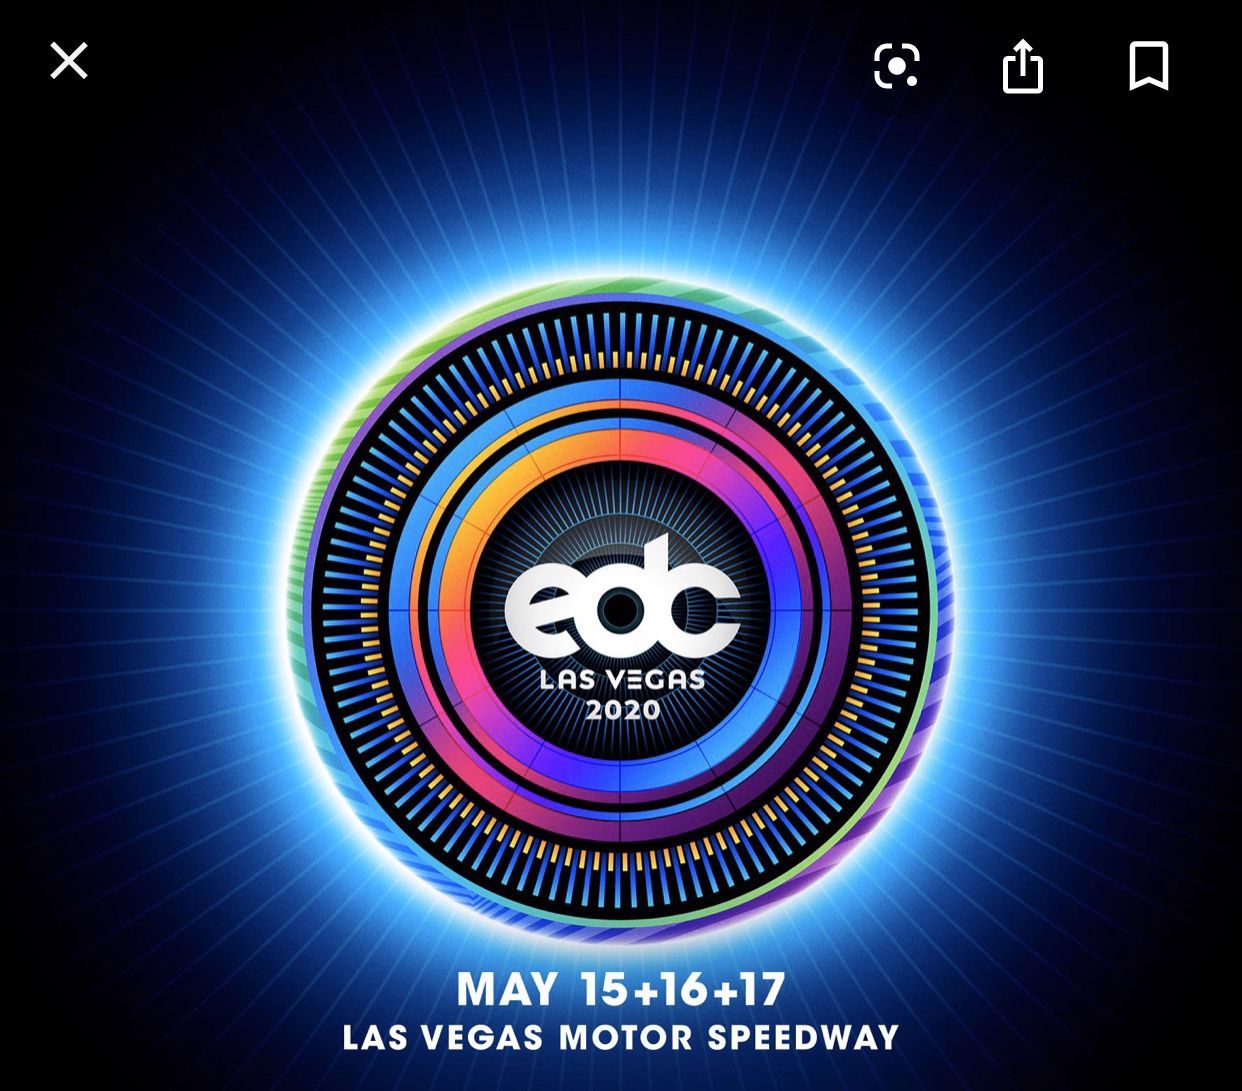 Edc tickets for sale